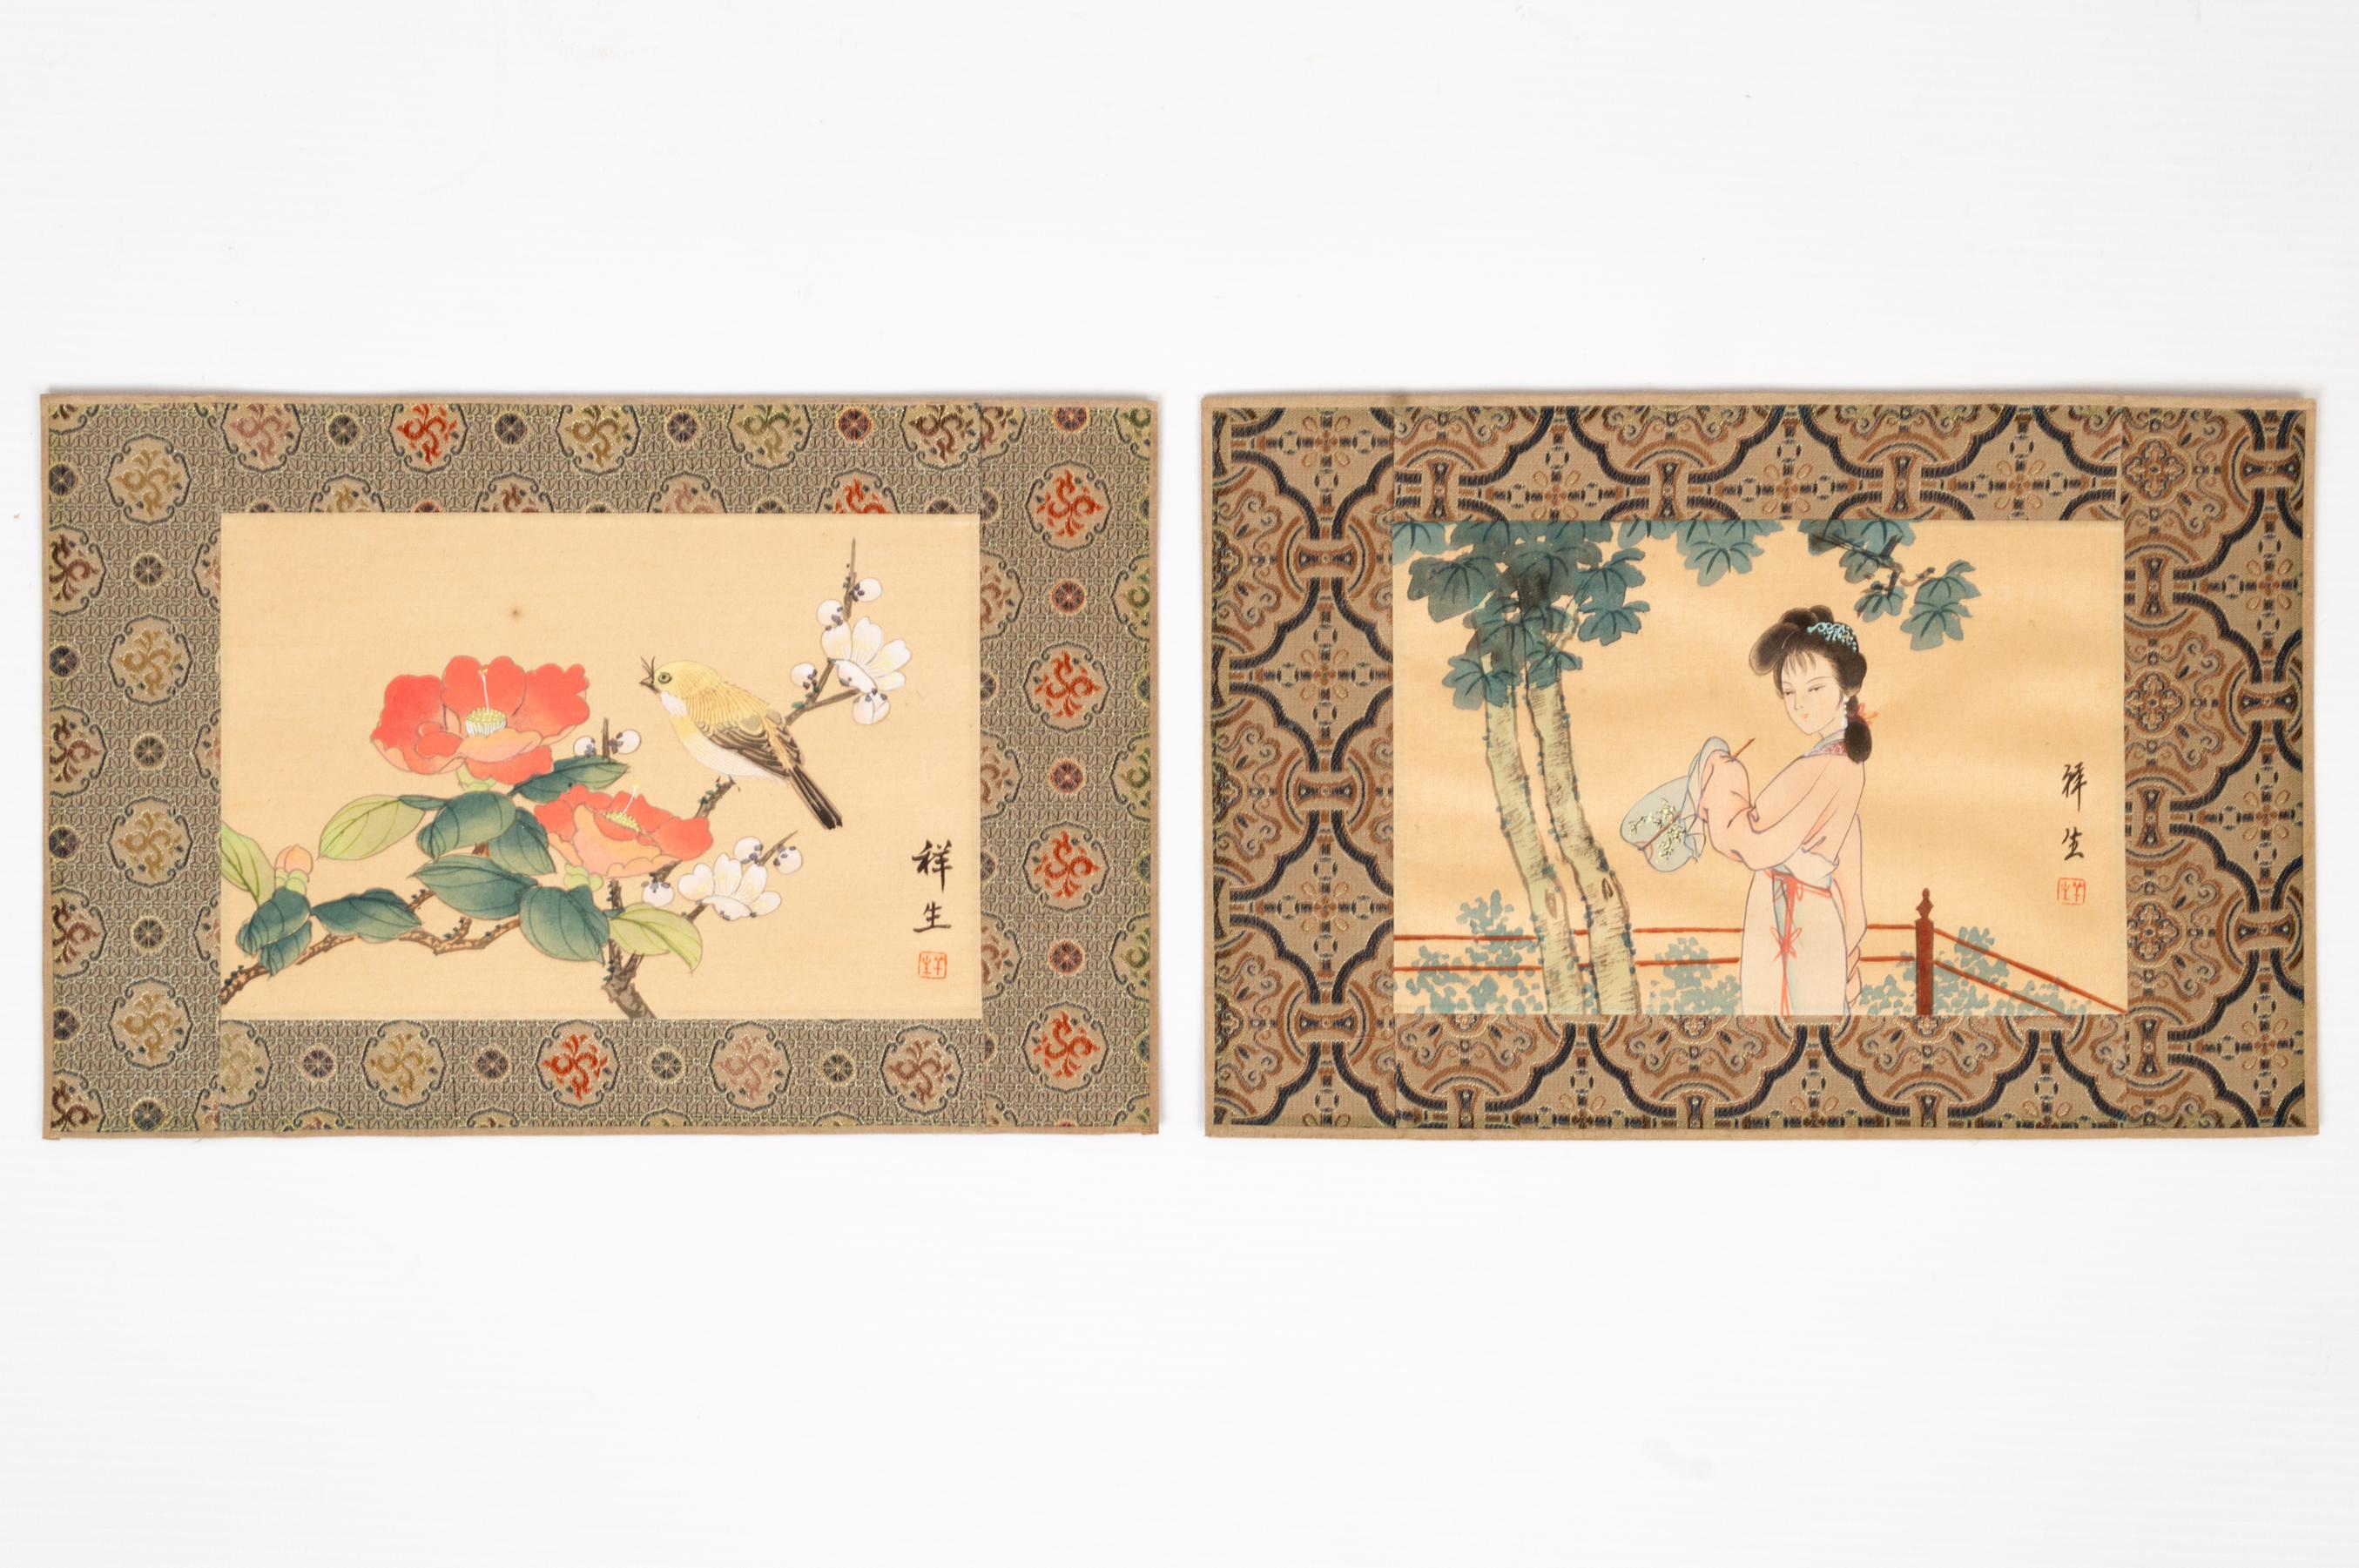 A pair of Chinese watercolour on silk paintings, China, C.1940.
Framed in its original silk brocade border.
Presented unframed.

In excellent vintage condition.